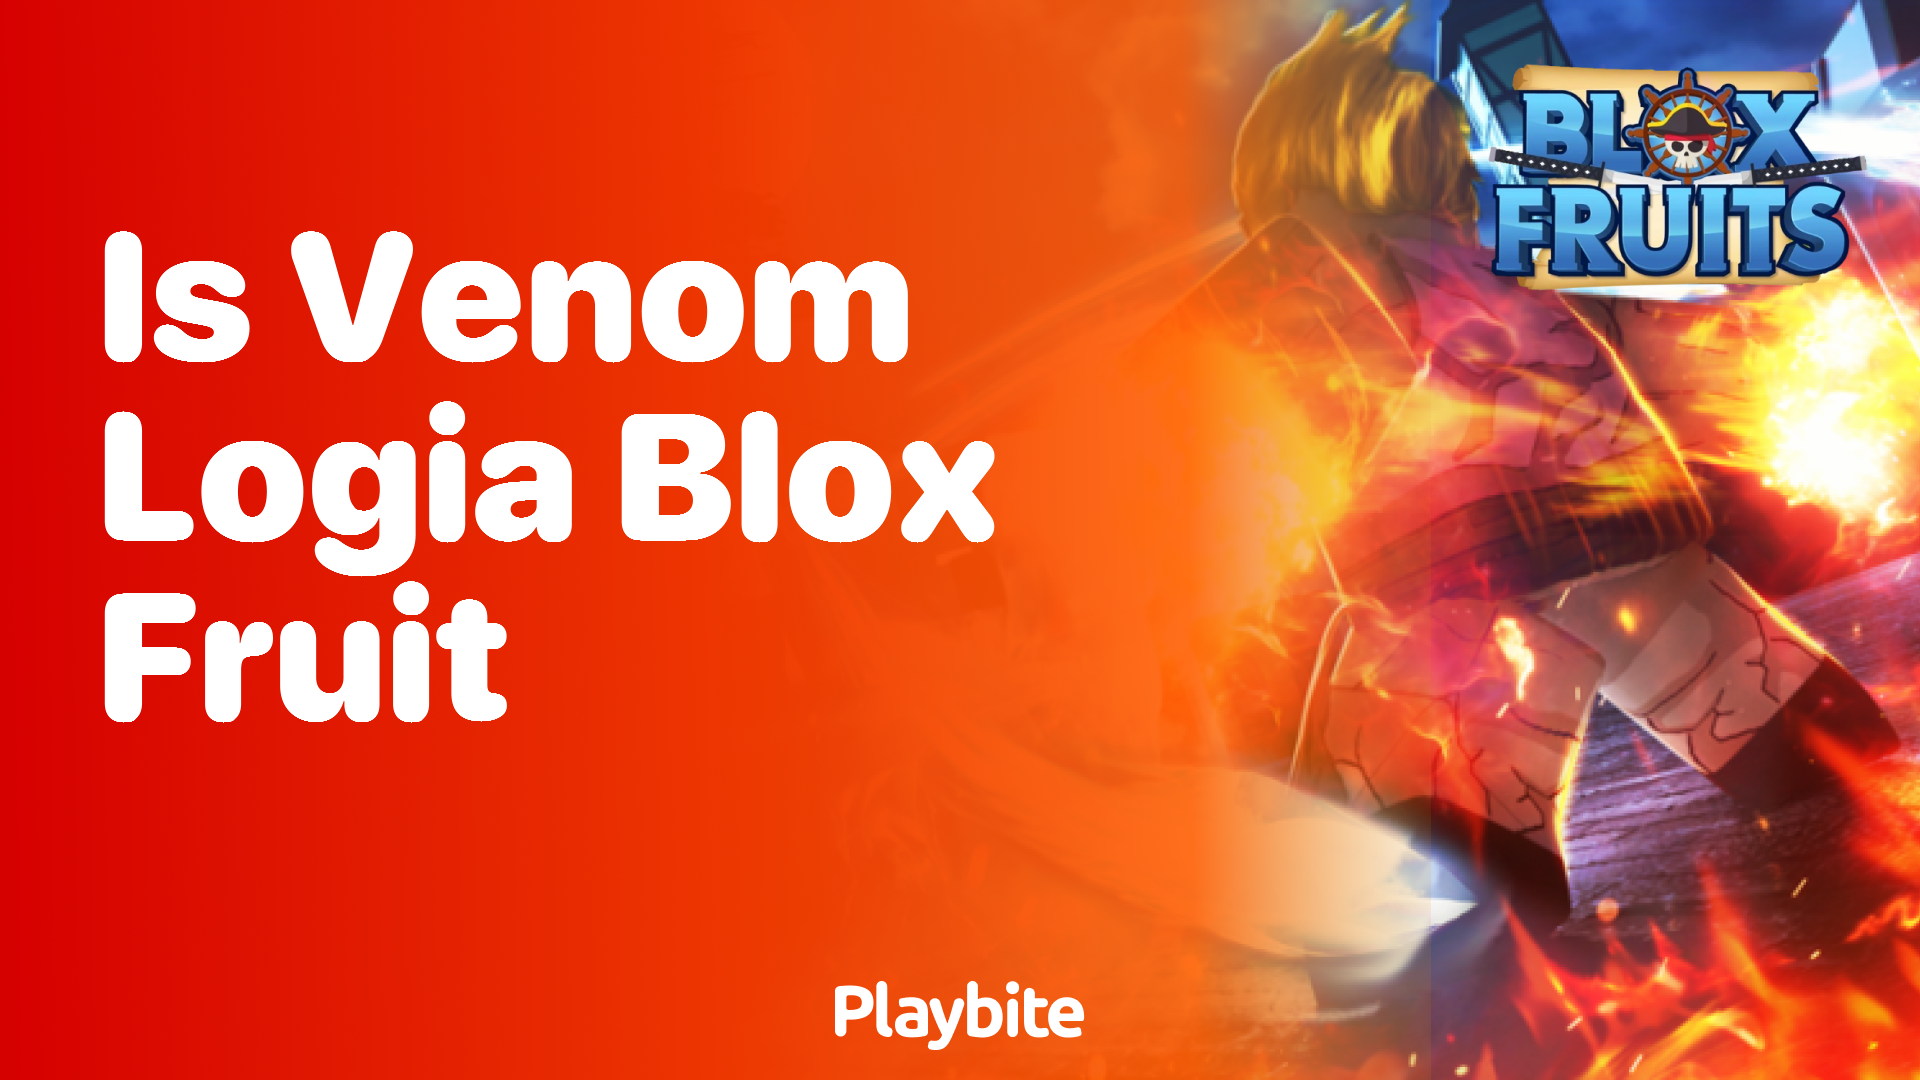 Is Venom Logia a Blox Fruit? Find Out Here!